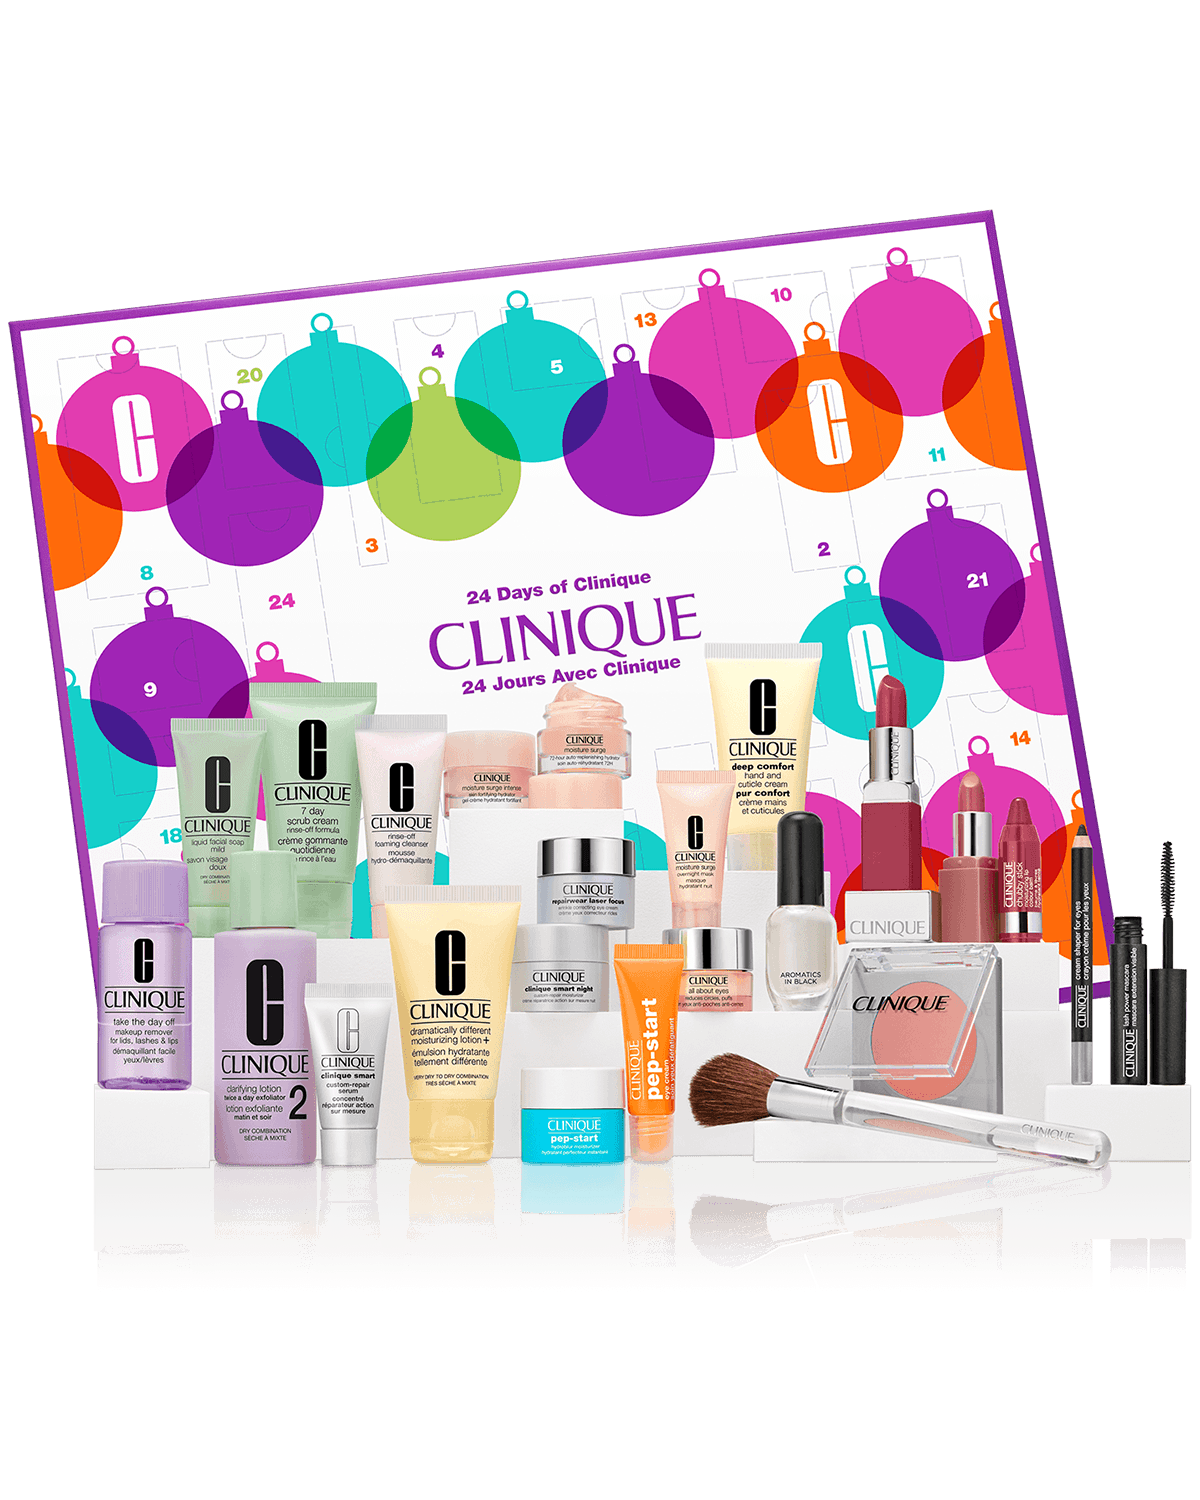 24 Days of Clinique